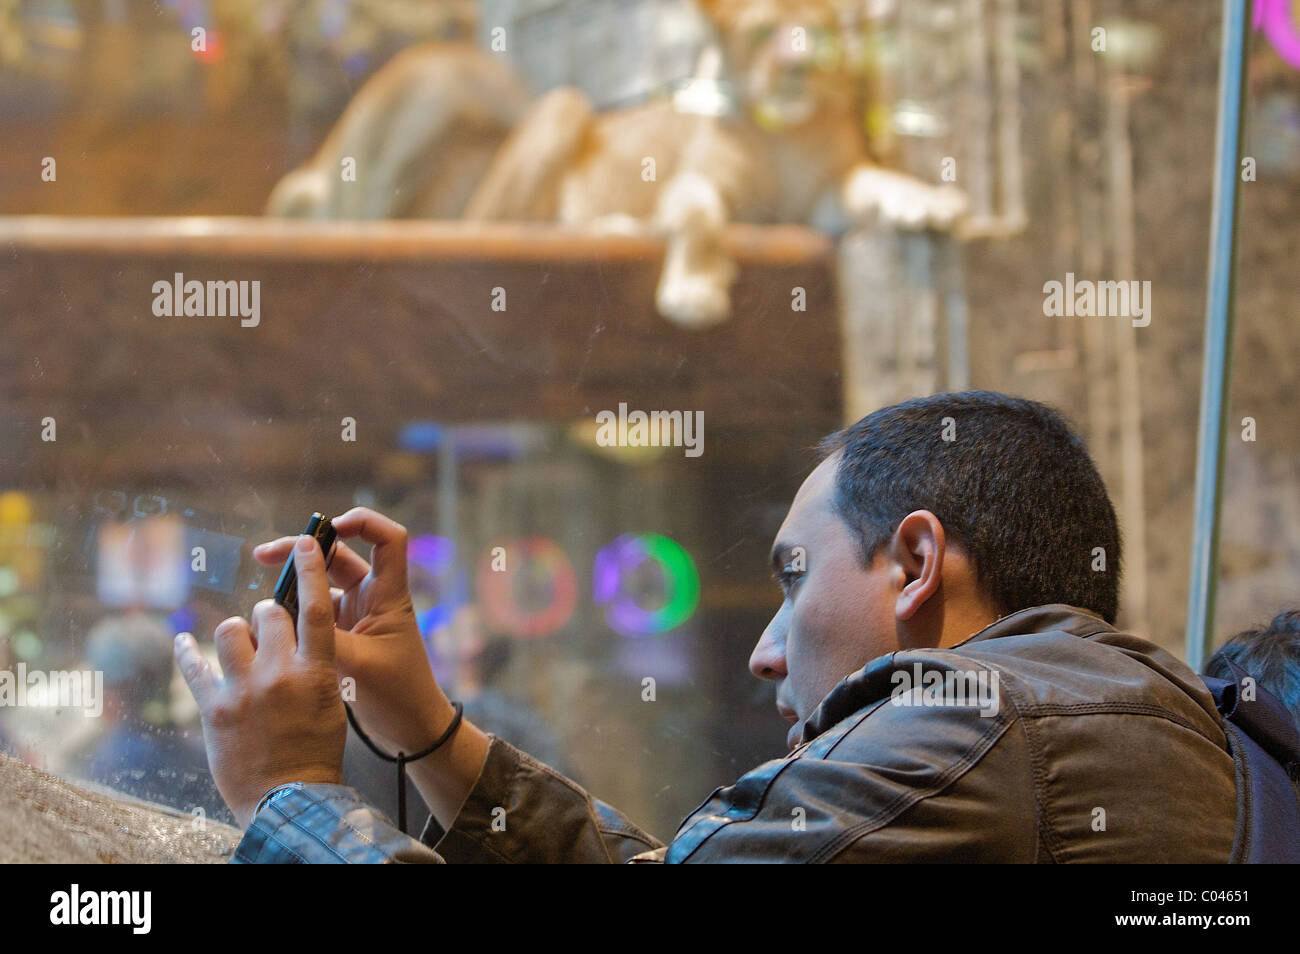 A man takes a photograph at the Lion Habitat at the Las Vegas MGM Grand Hotel and Casino Stock Photo